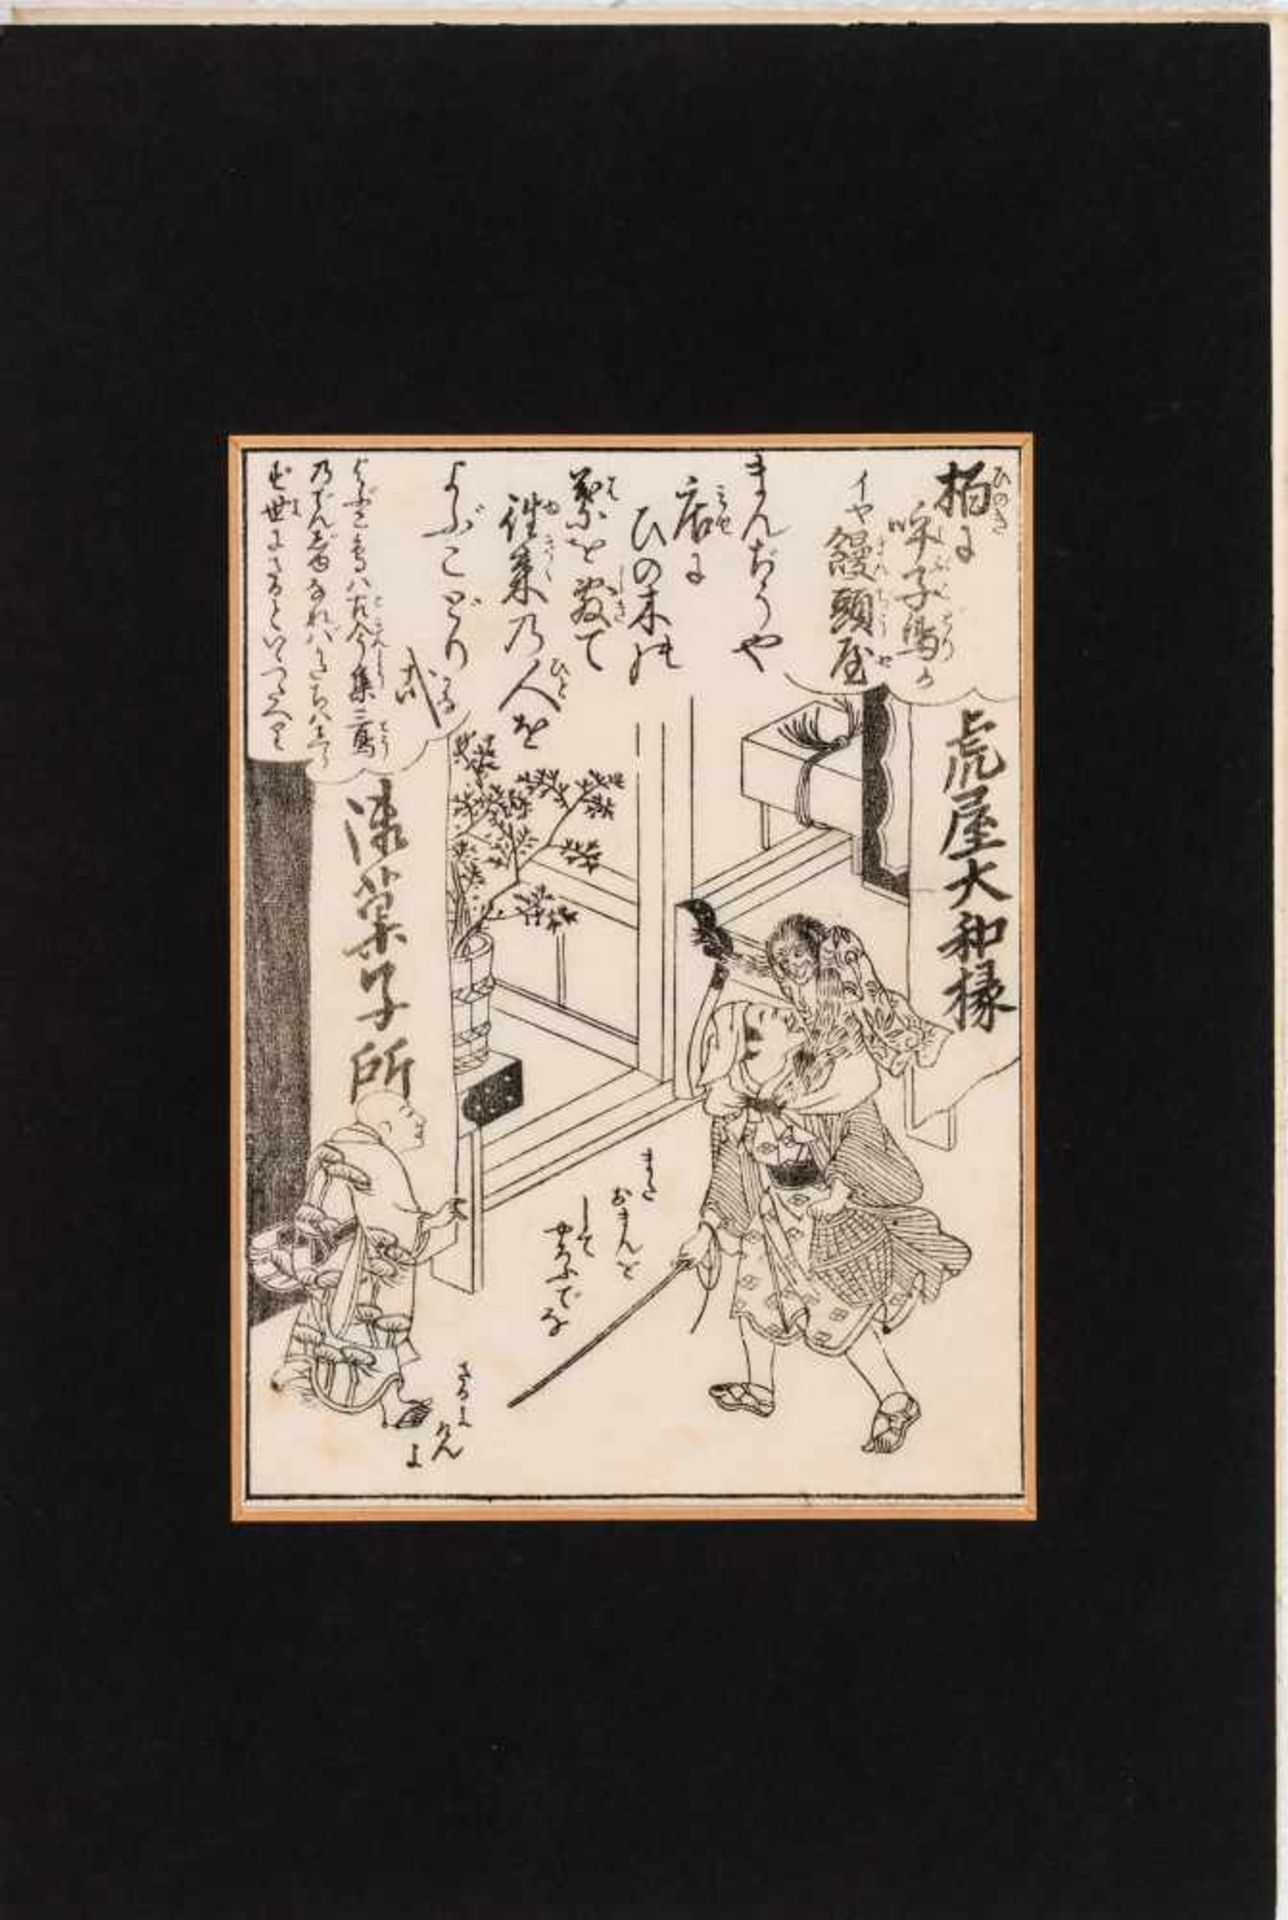 A GROUP OF EIGHT JAPANESE ORIGINAL WOODBLOCK PRINTS, 18TH CENTURYOriginal woodblock prints, - Image 7 of 9